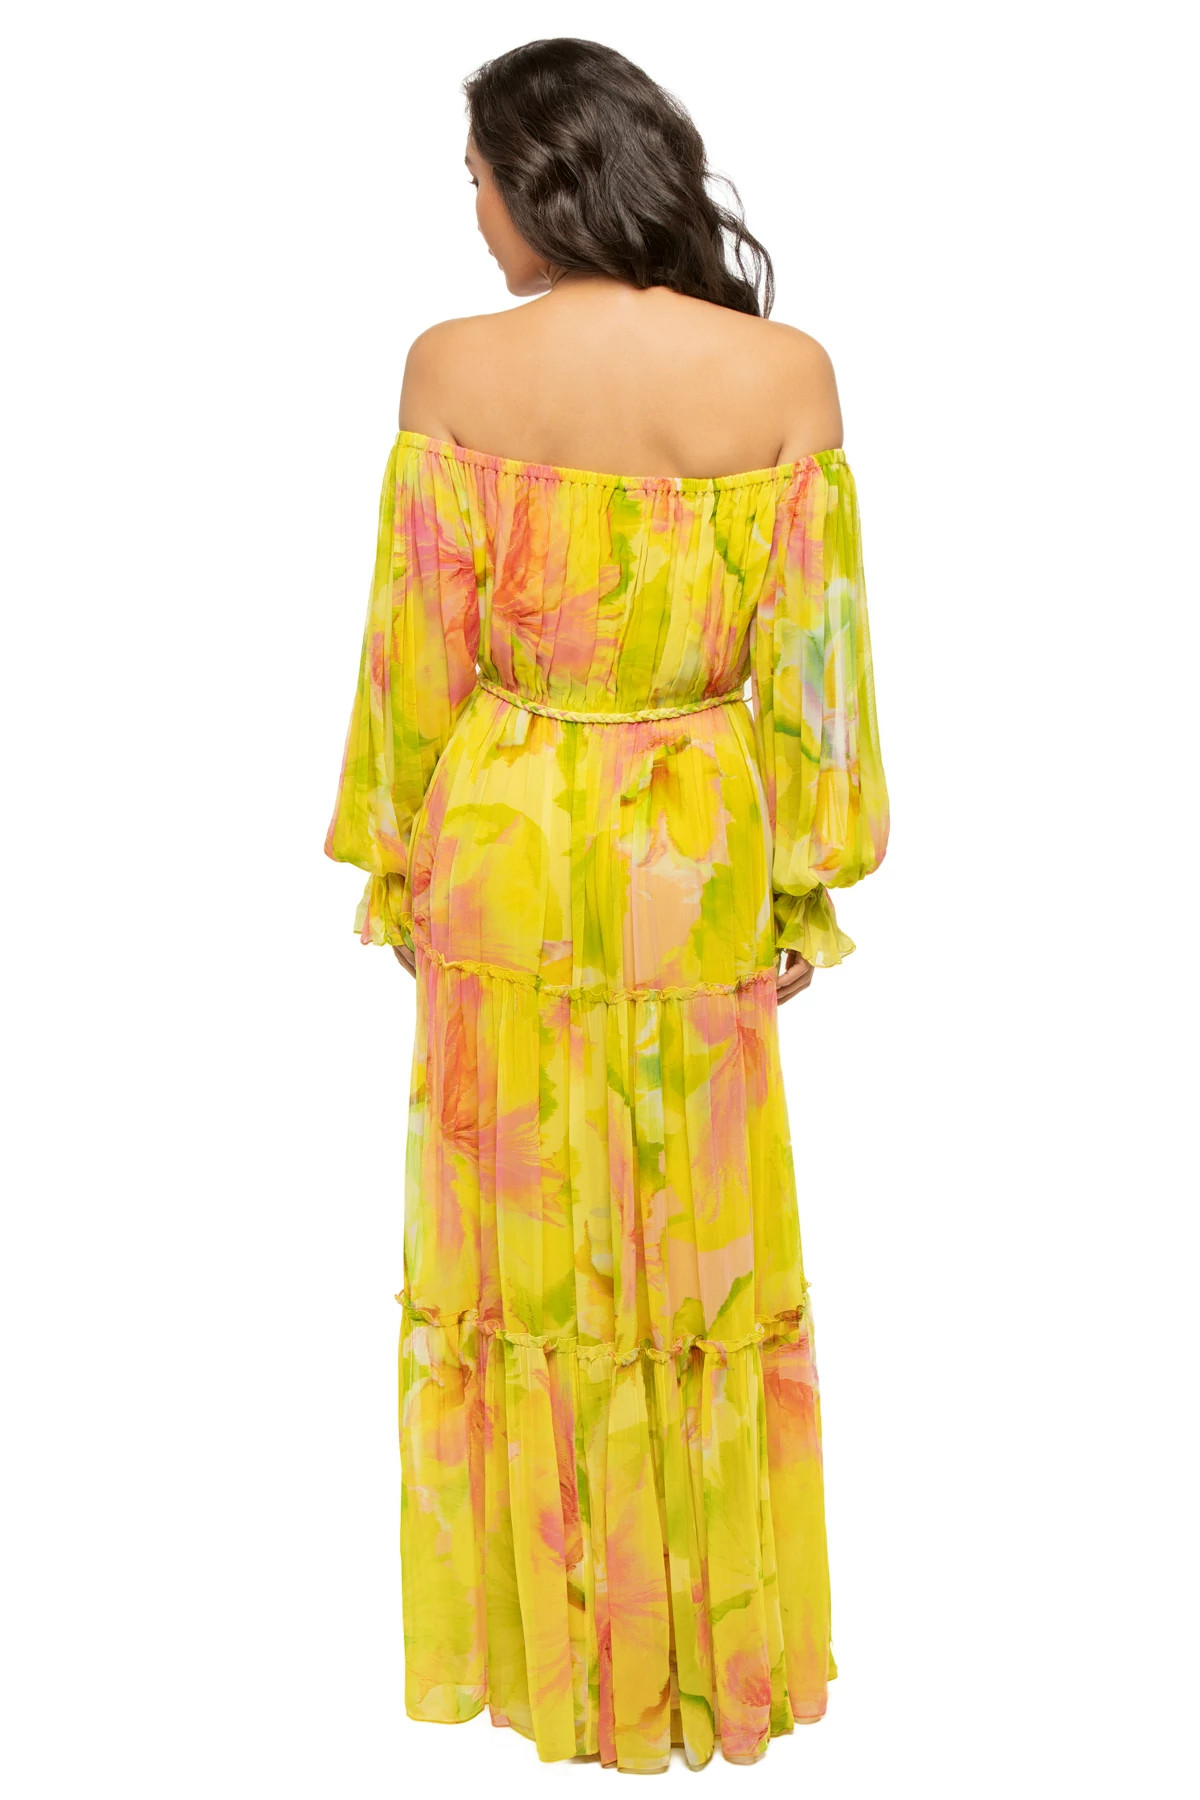 YELLOW FLORAL Off The Shoulder Maxi Dress image number 2